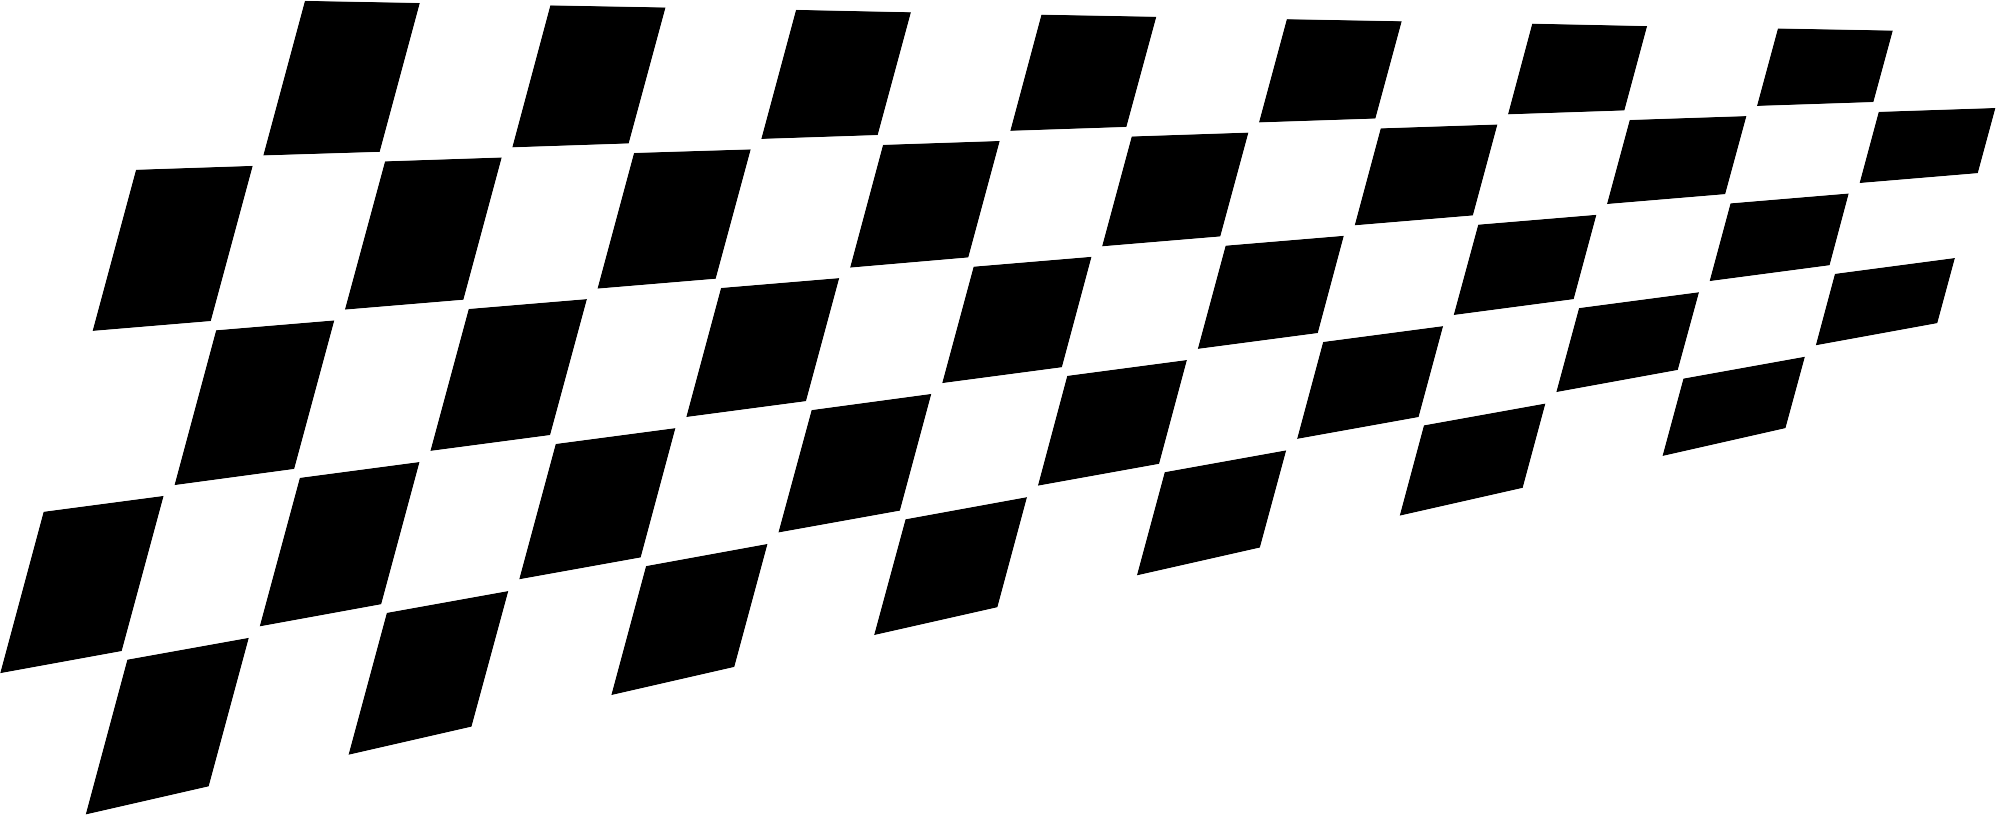 Racing Flag Wallpapers - Top Free Racing Flag Backgrounds - WallpaperAccess